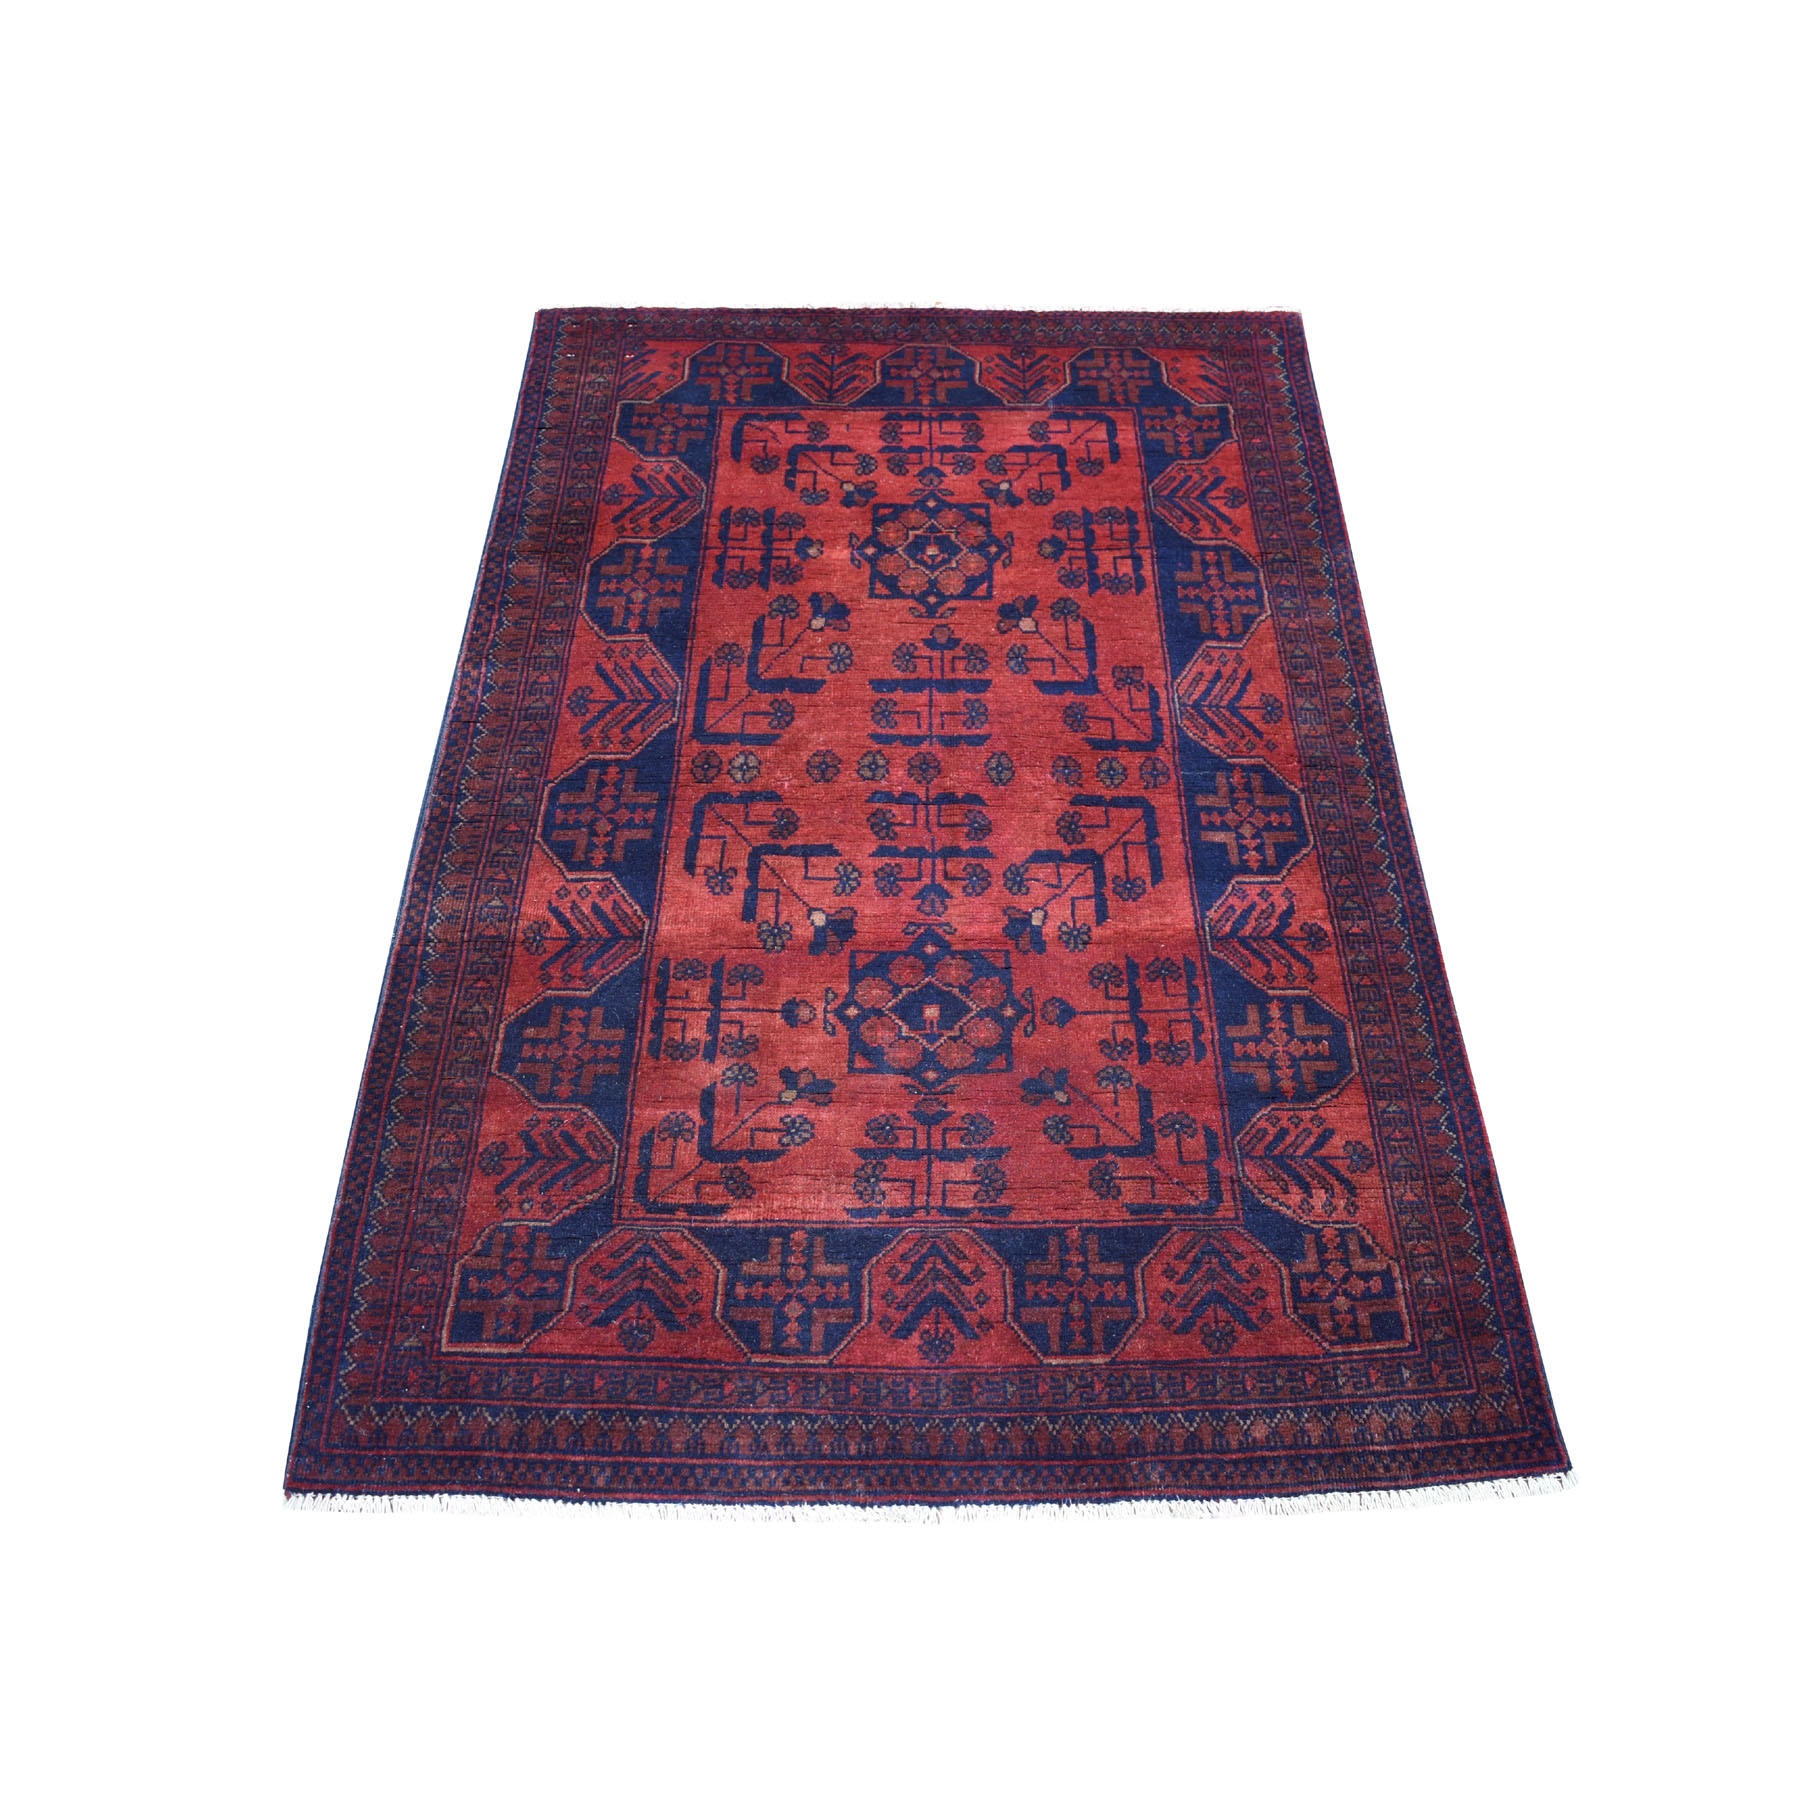 3'3"X5'1" Deep And Saturated Red Geometric Design Afghan Andkhoy Pure Wool Hand-Knotted Oriental Rug moaec888